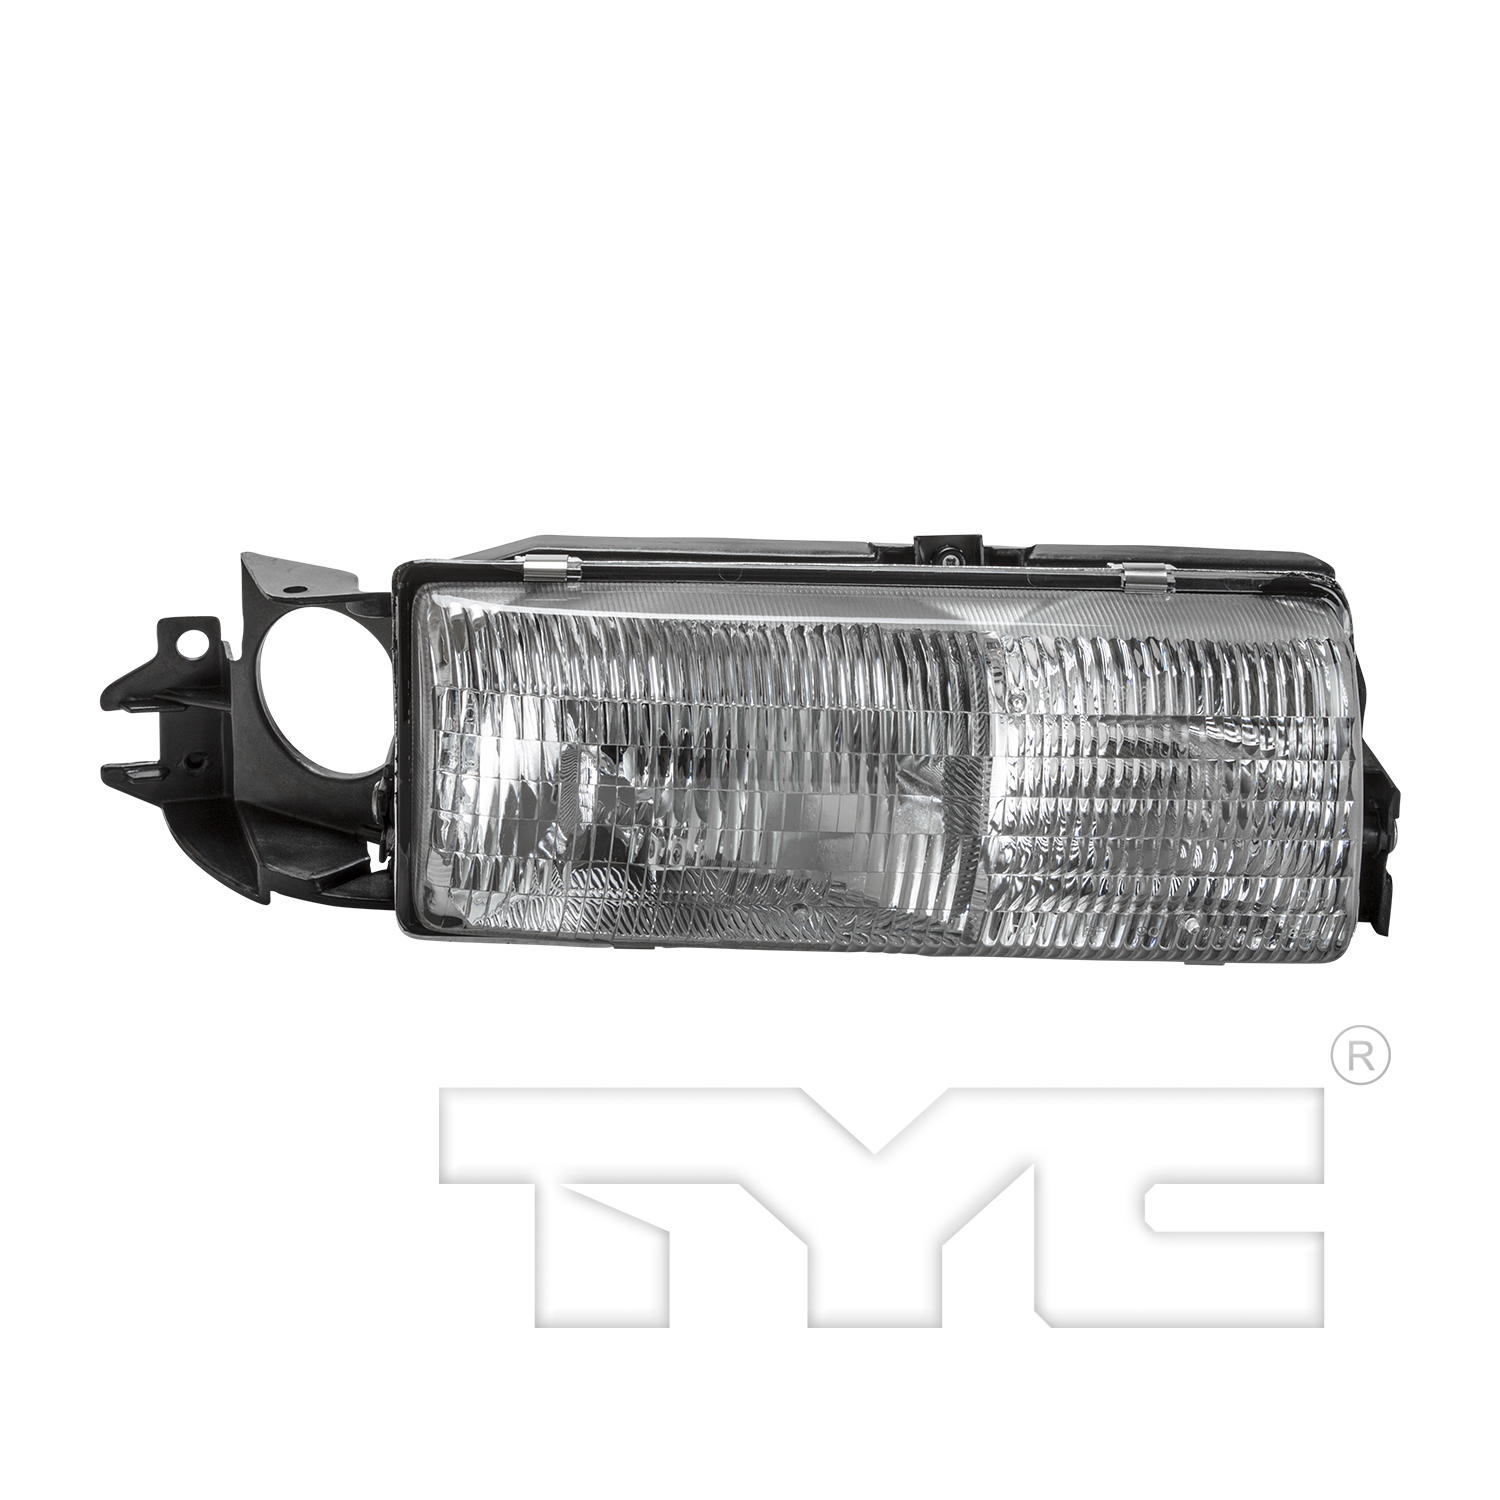 Aftermarket HEADLIGHTS for CHEVROLET - CAPRICE, CAPRICE,91-96,RT Headlamp assy composite